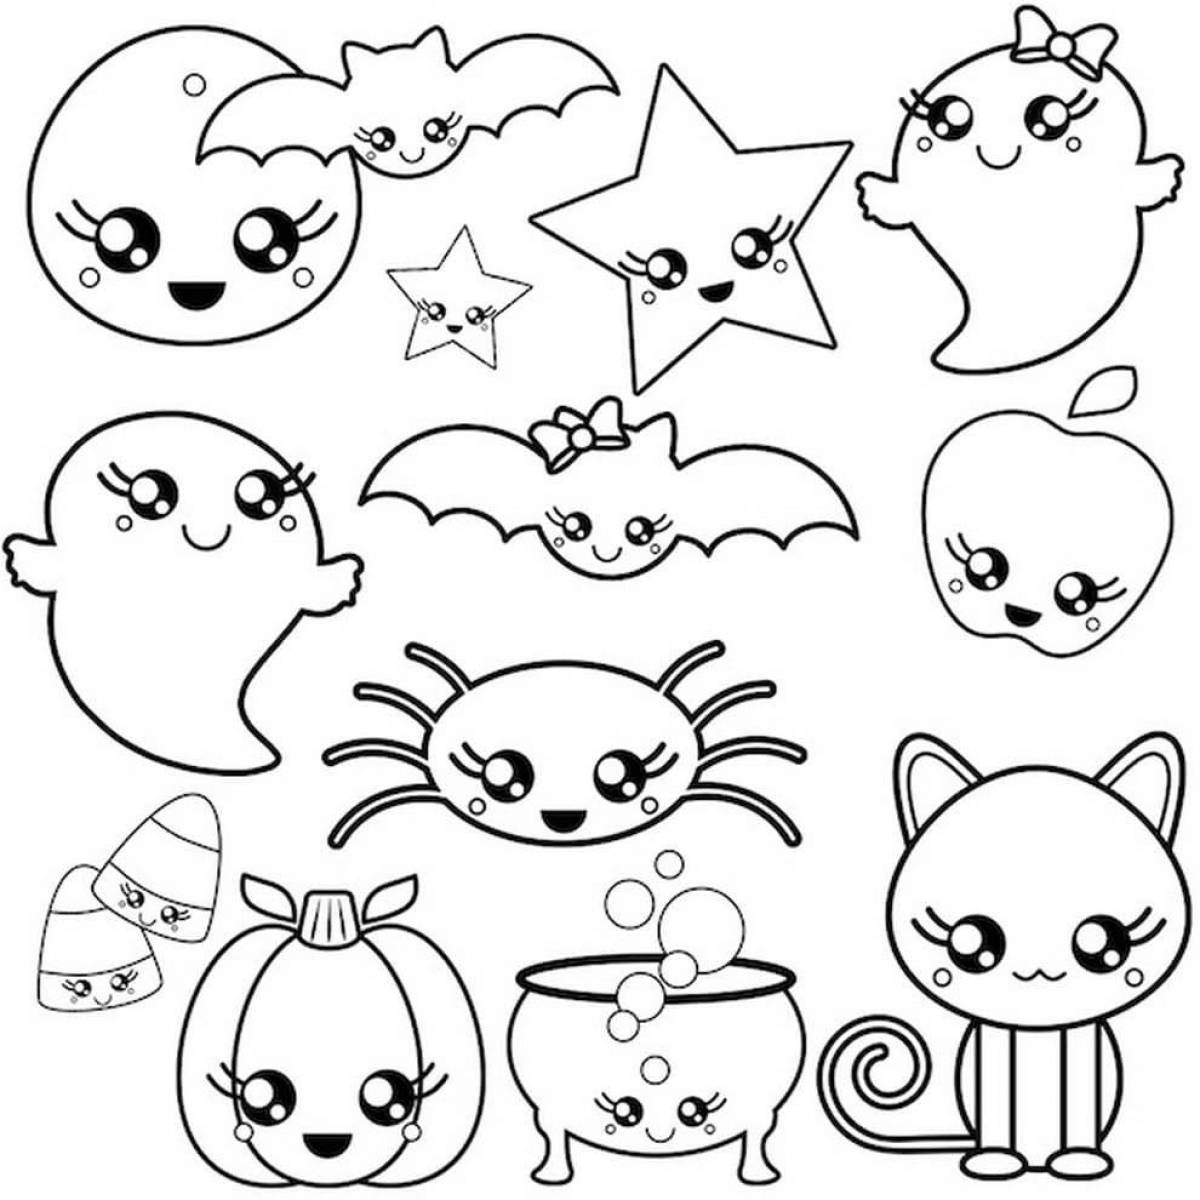 Lovely stickers for coloring